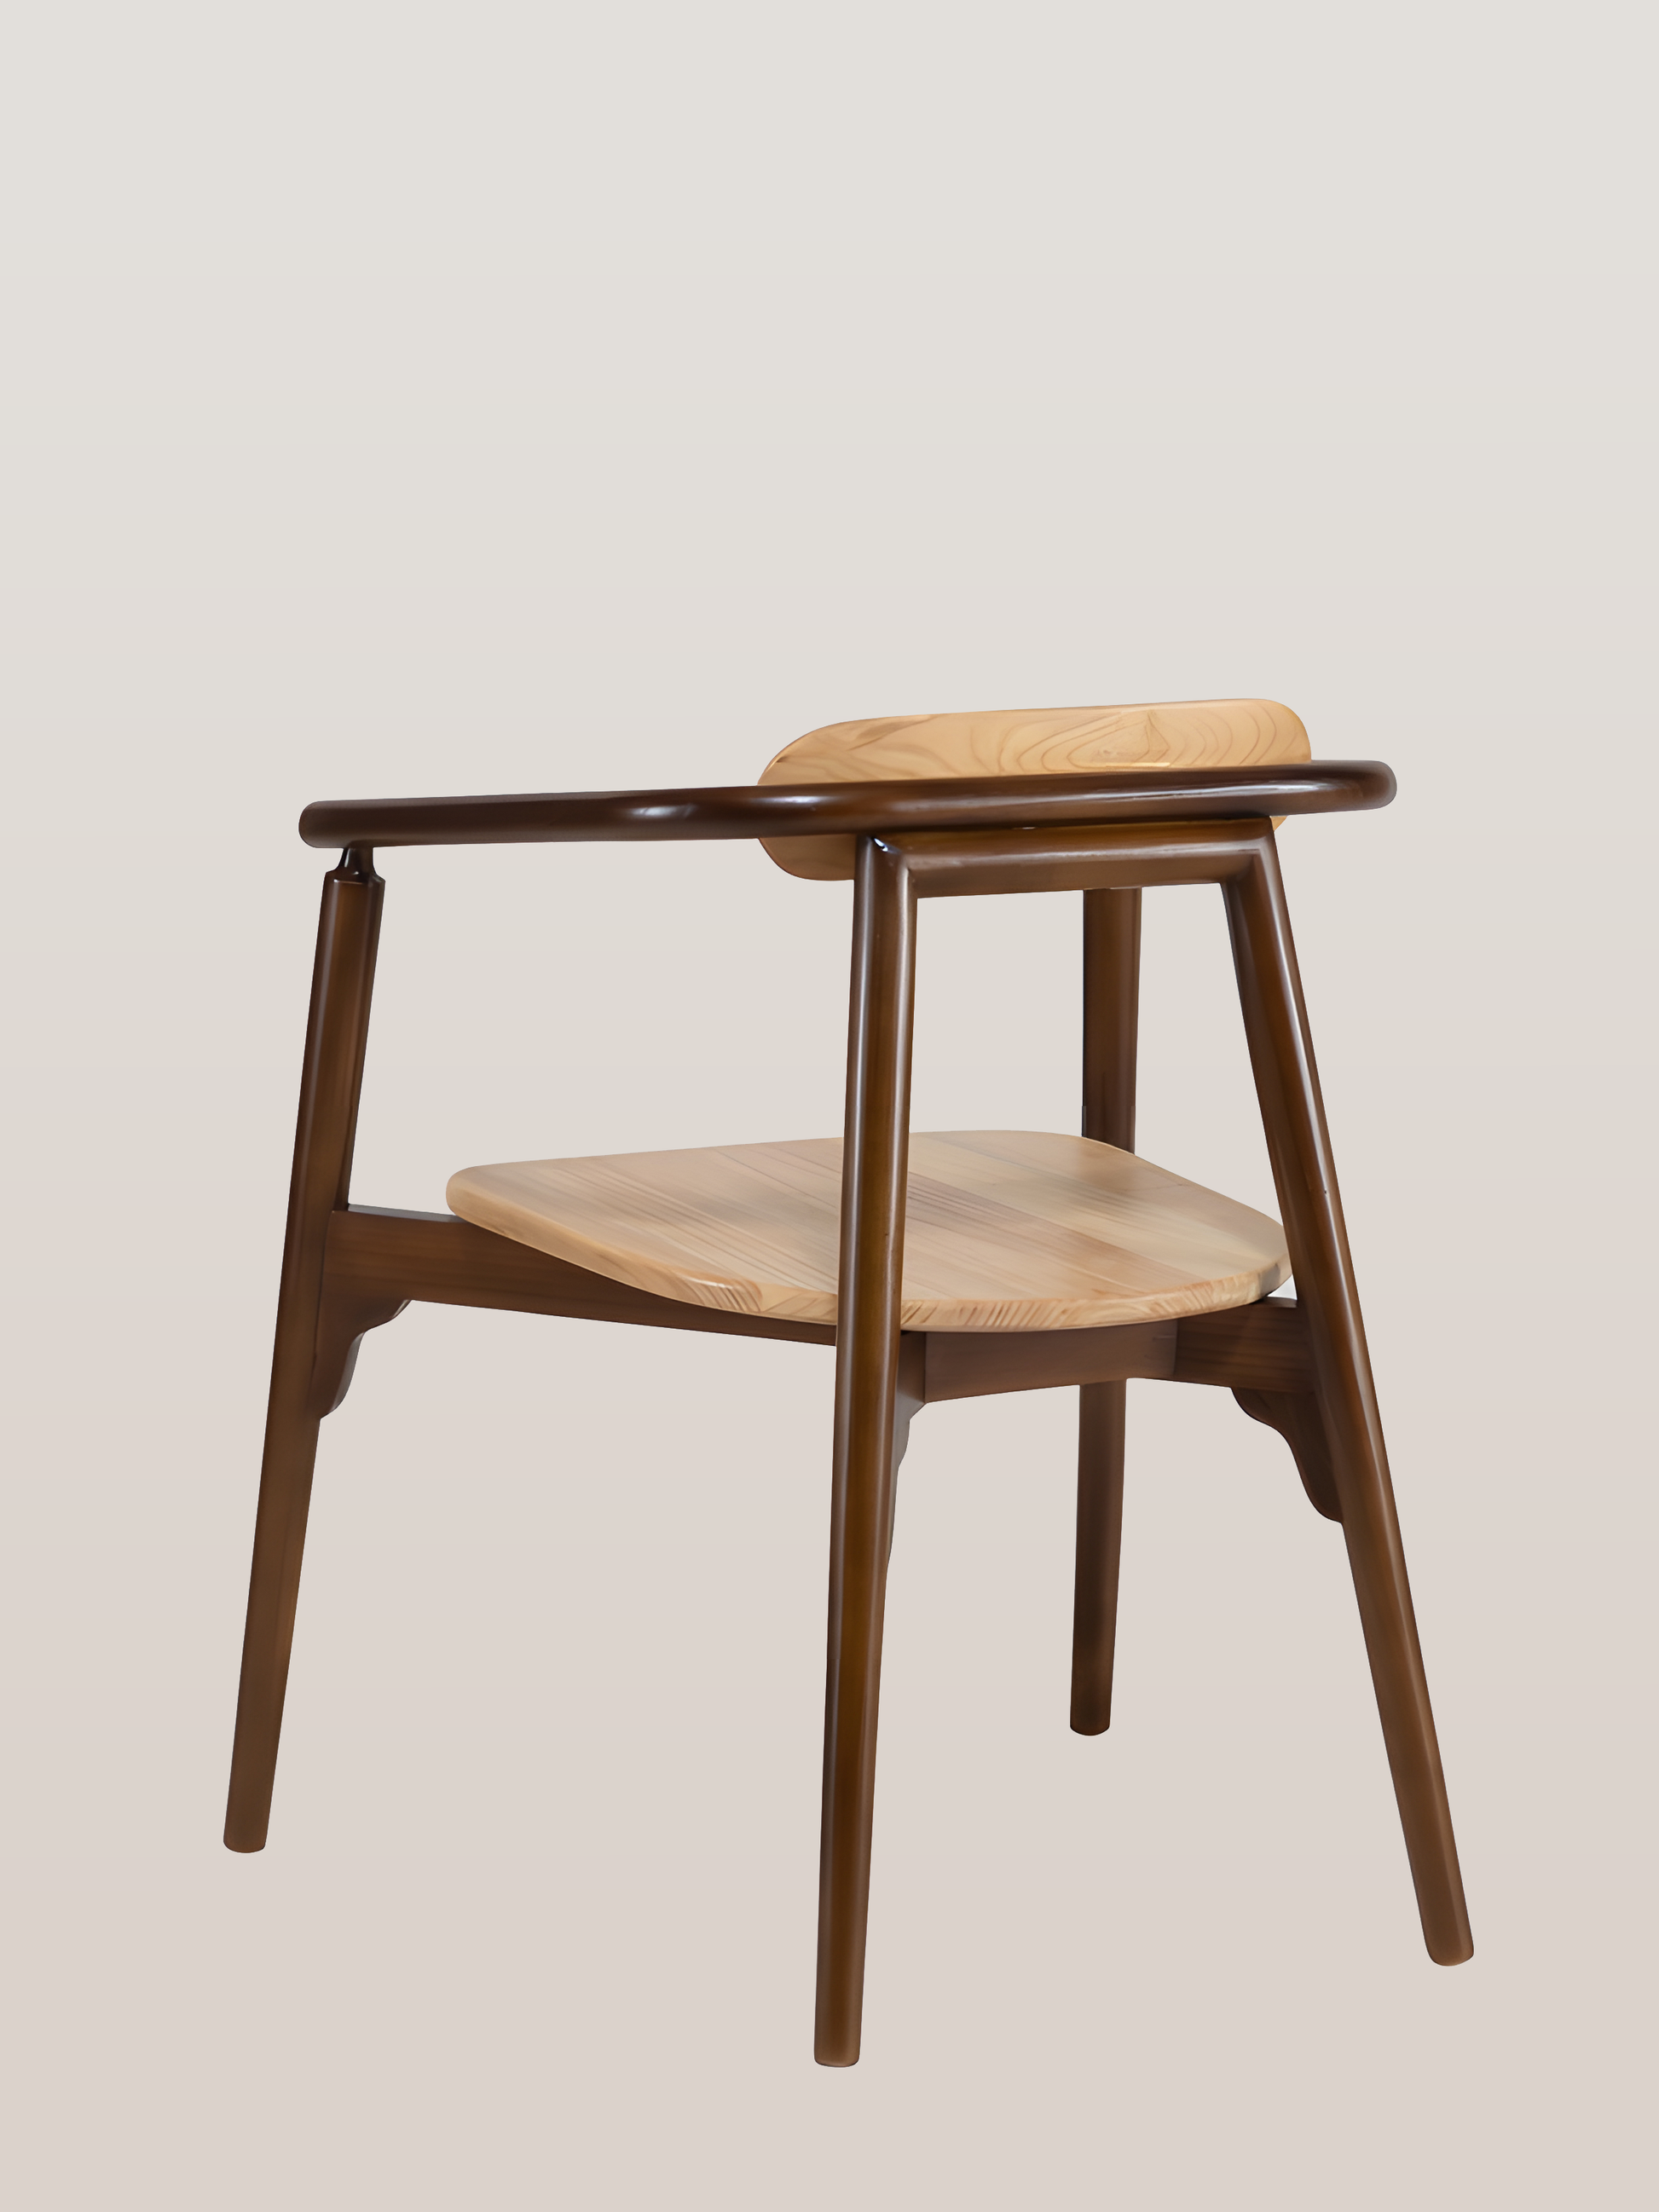 Ibanez Sungkai Wood Dining Chair with painted brown armrest and legs back view by Mellowdays Furniture